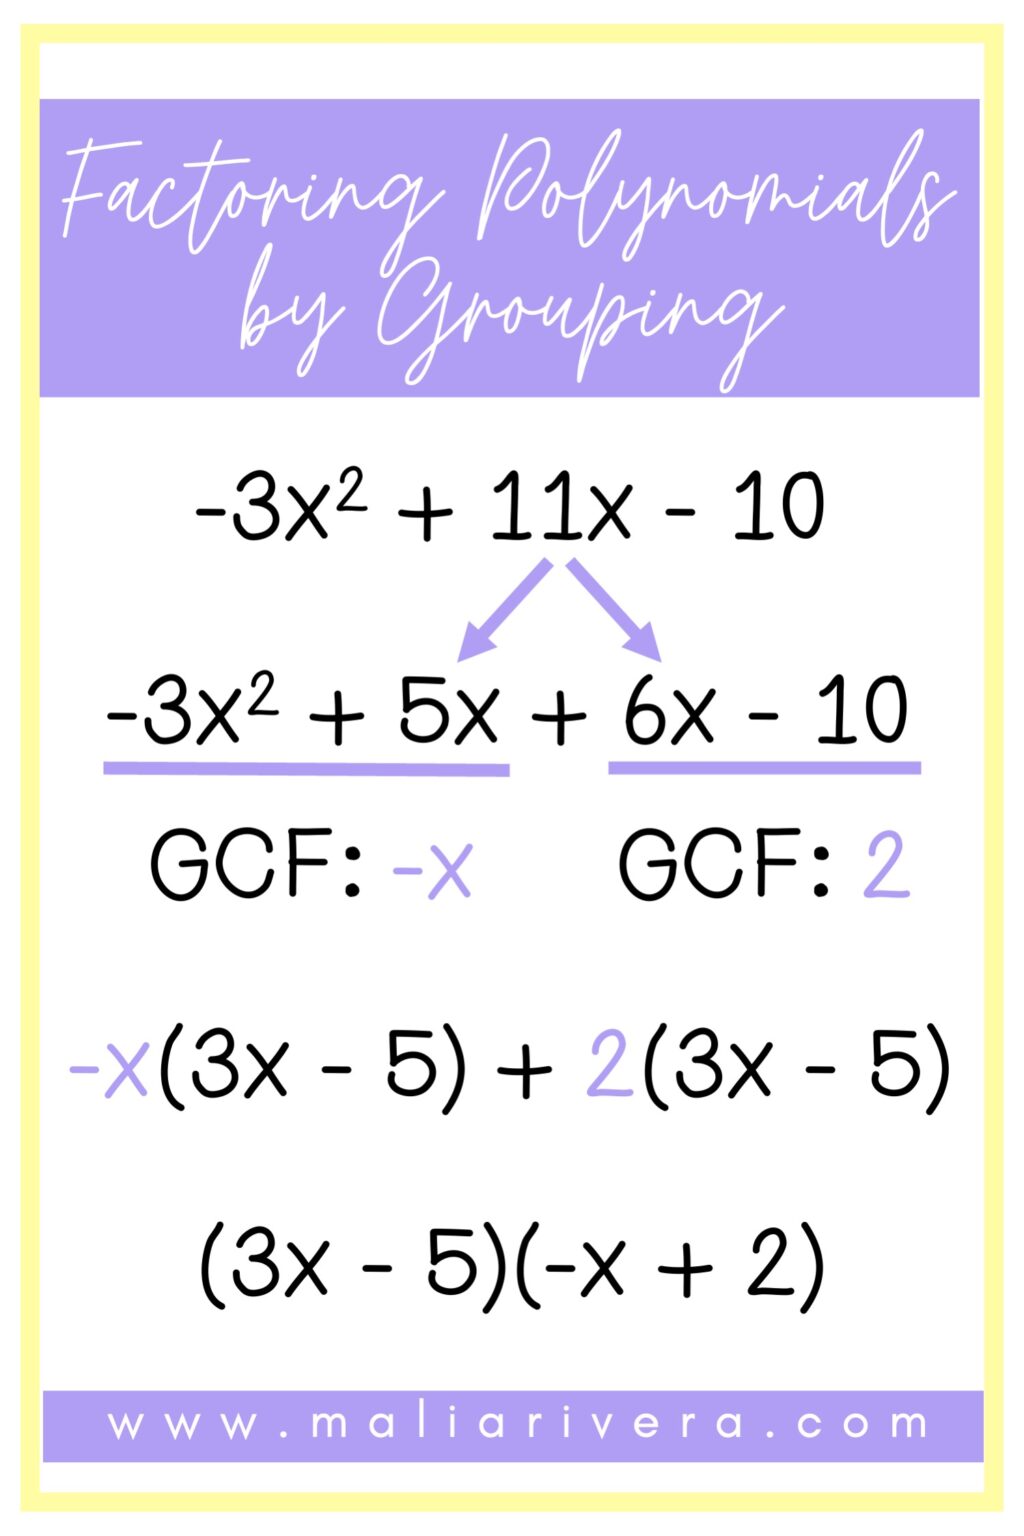 factoring polynomials completely assignment edgenuity